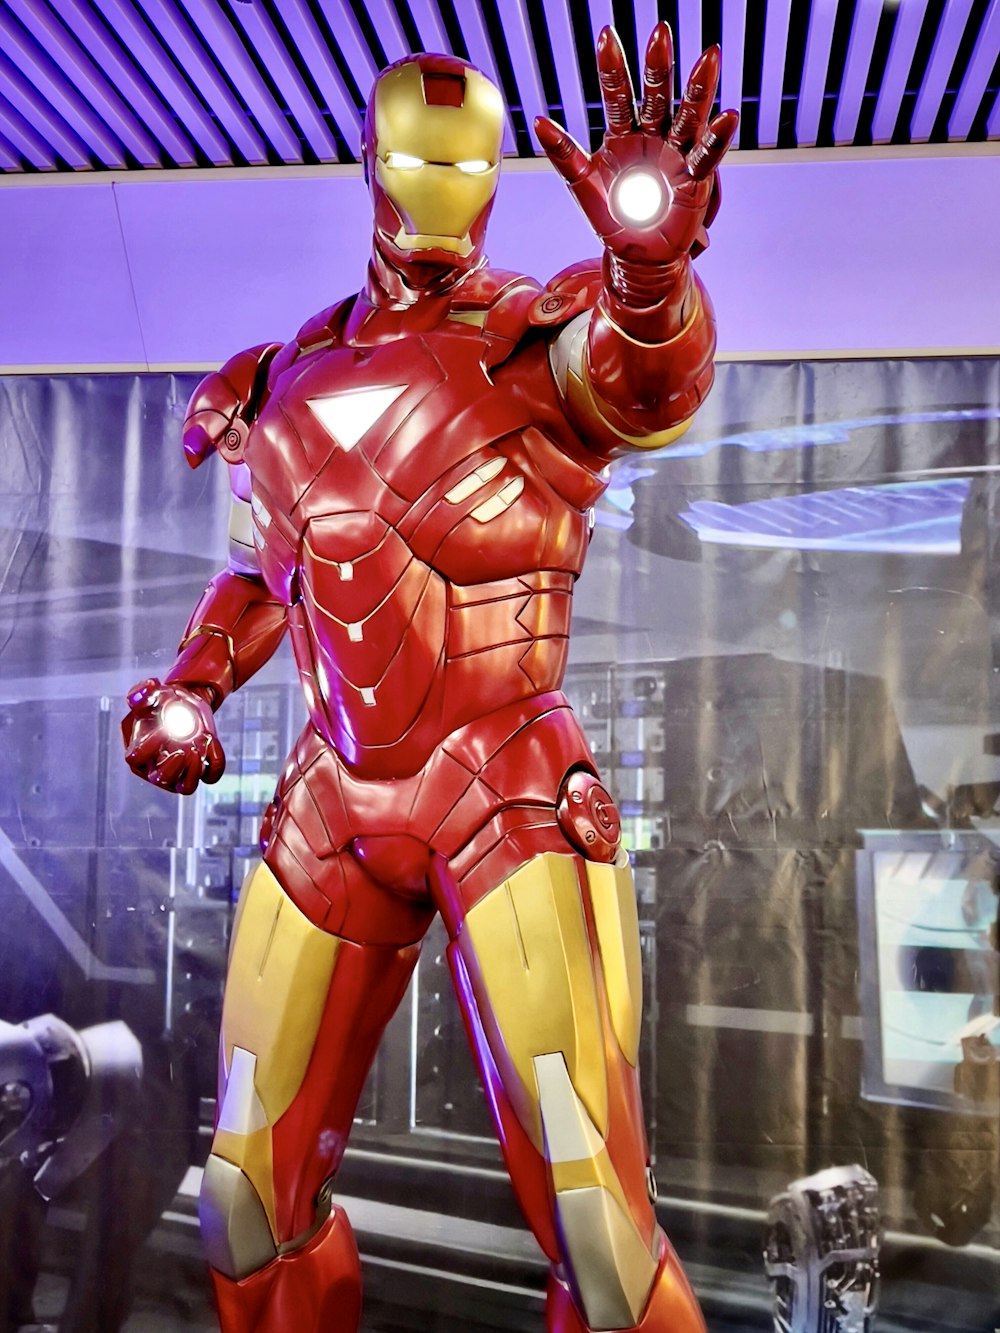 a statue of iron man is displayed in a museum